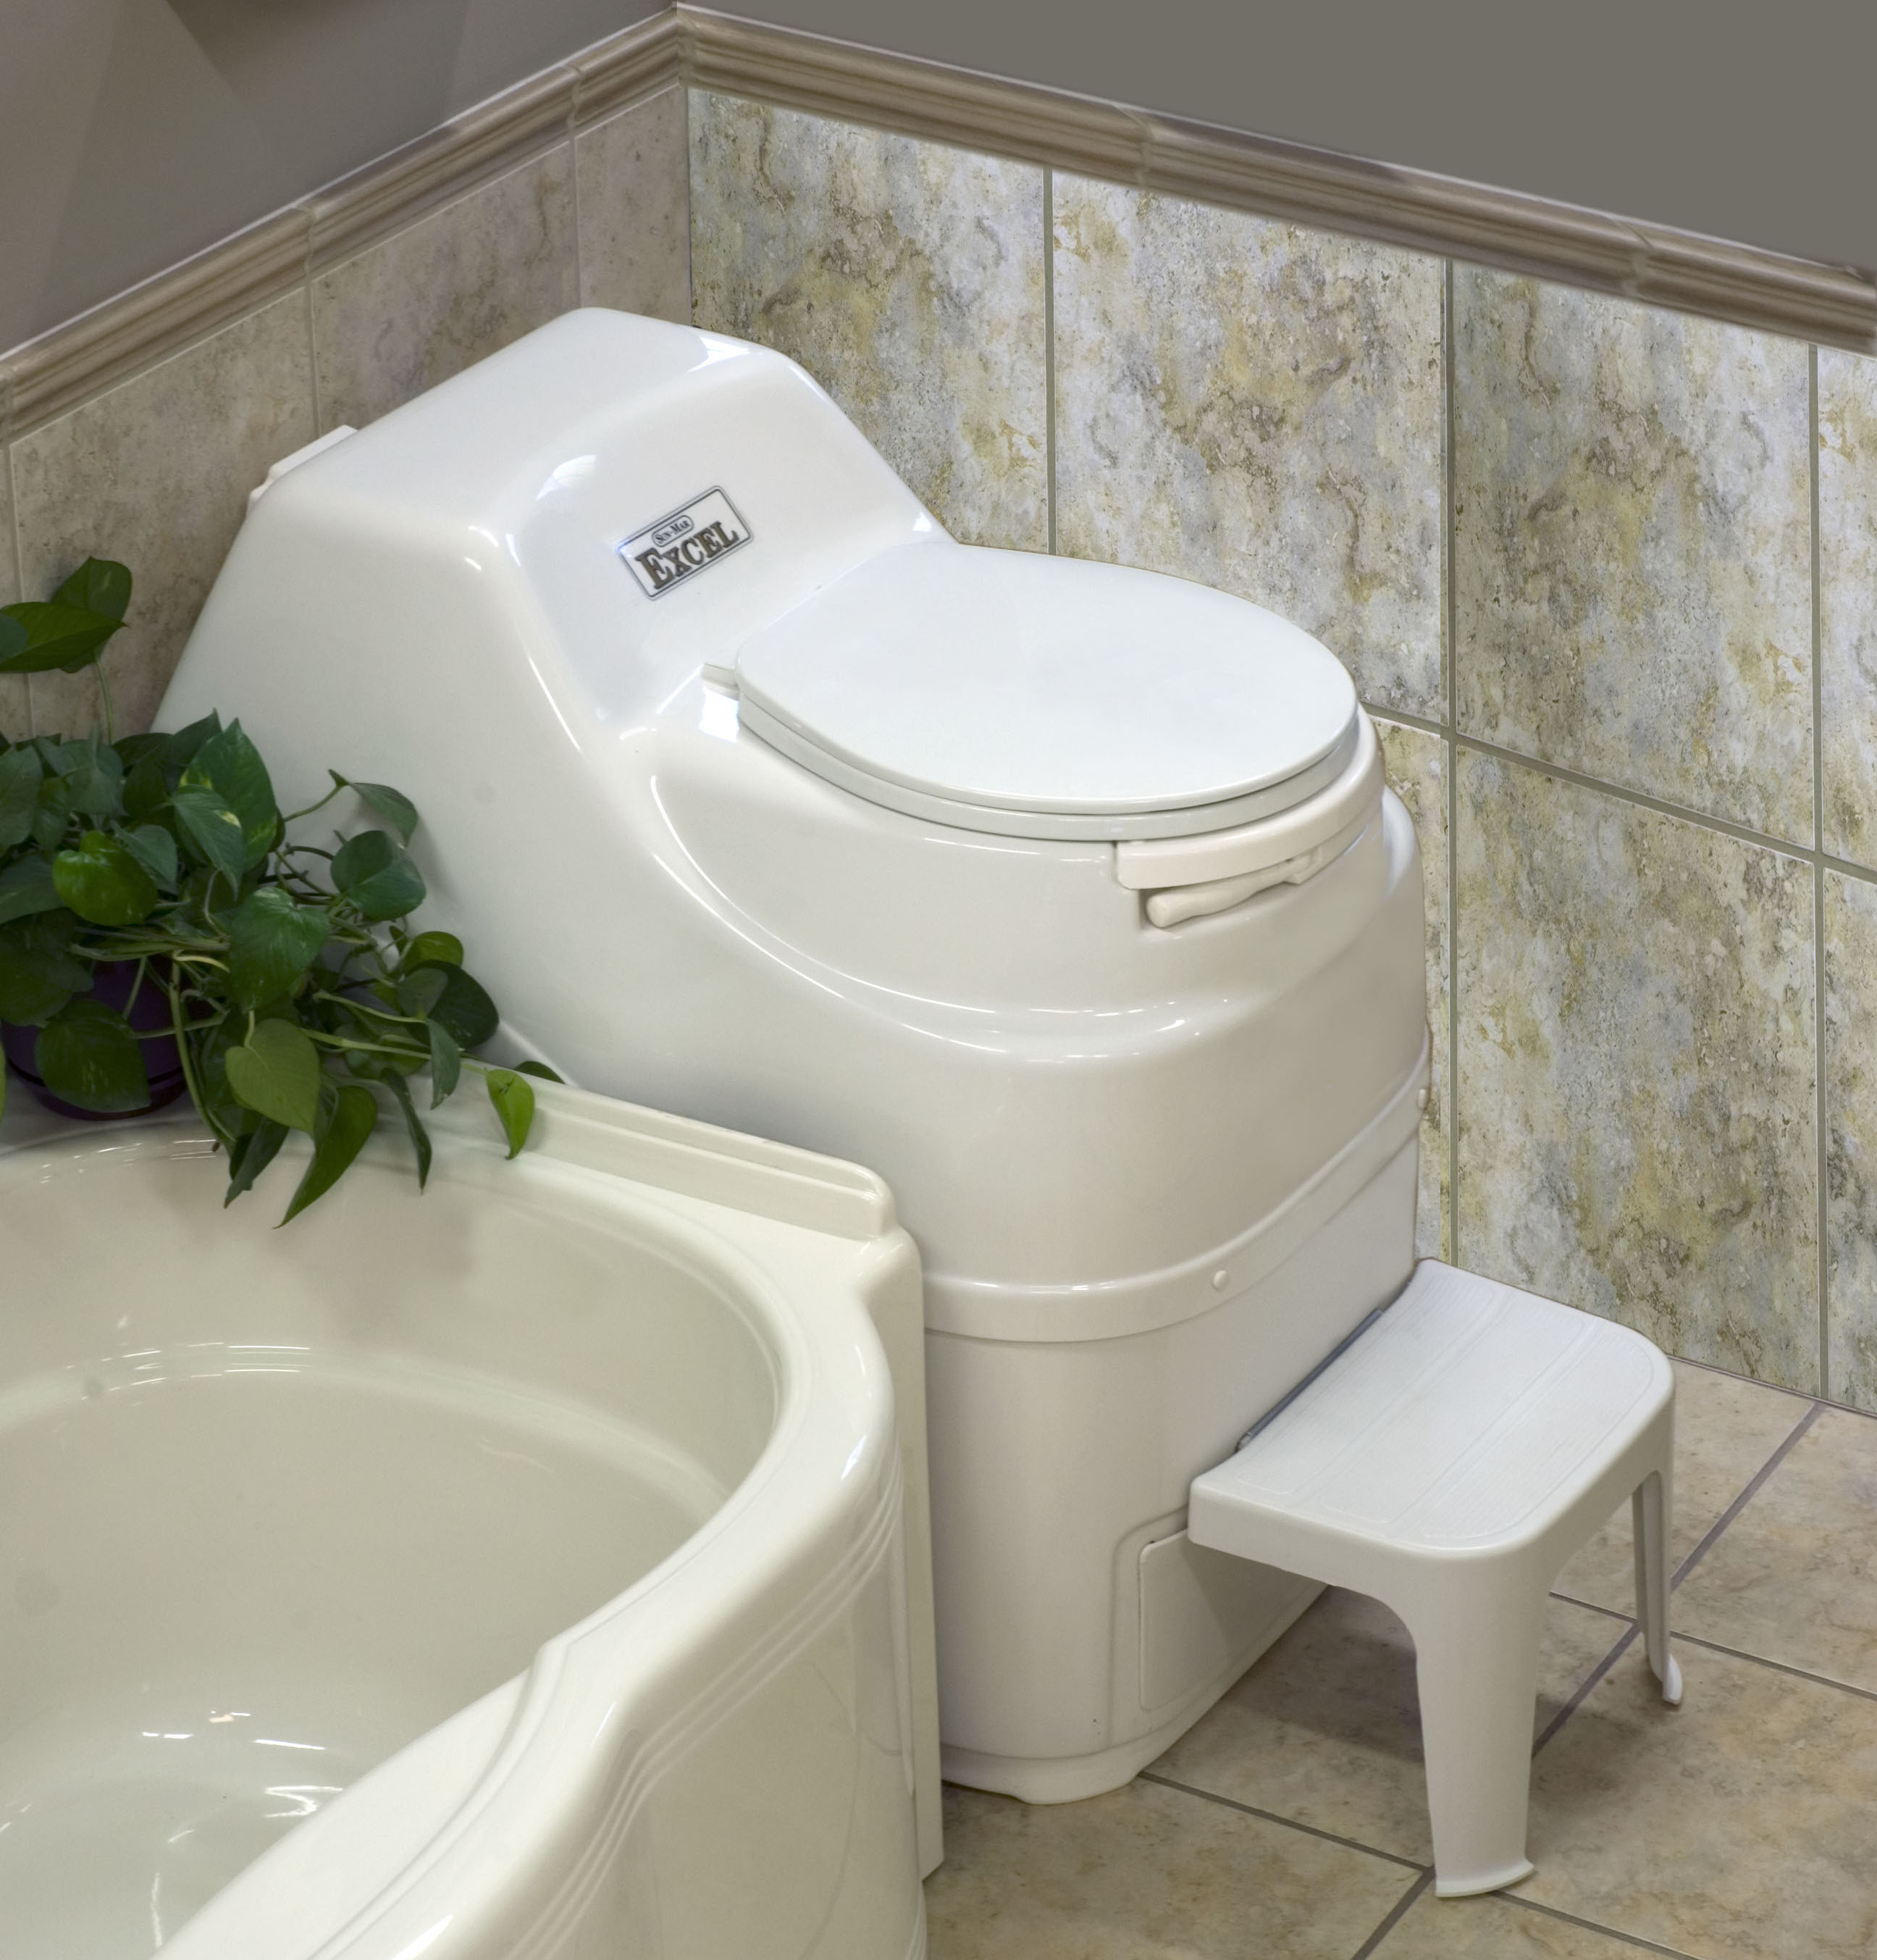 a composting toilet